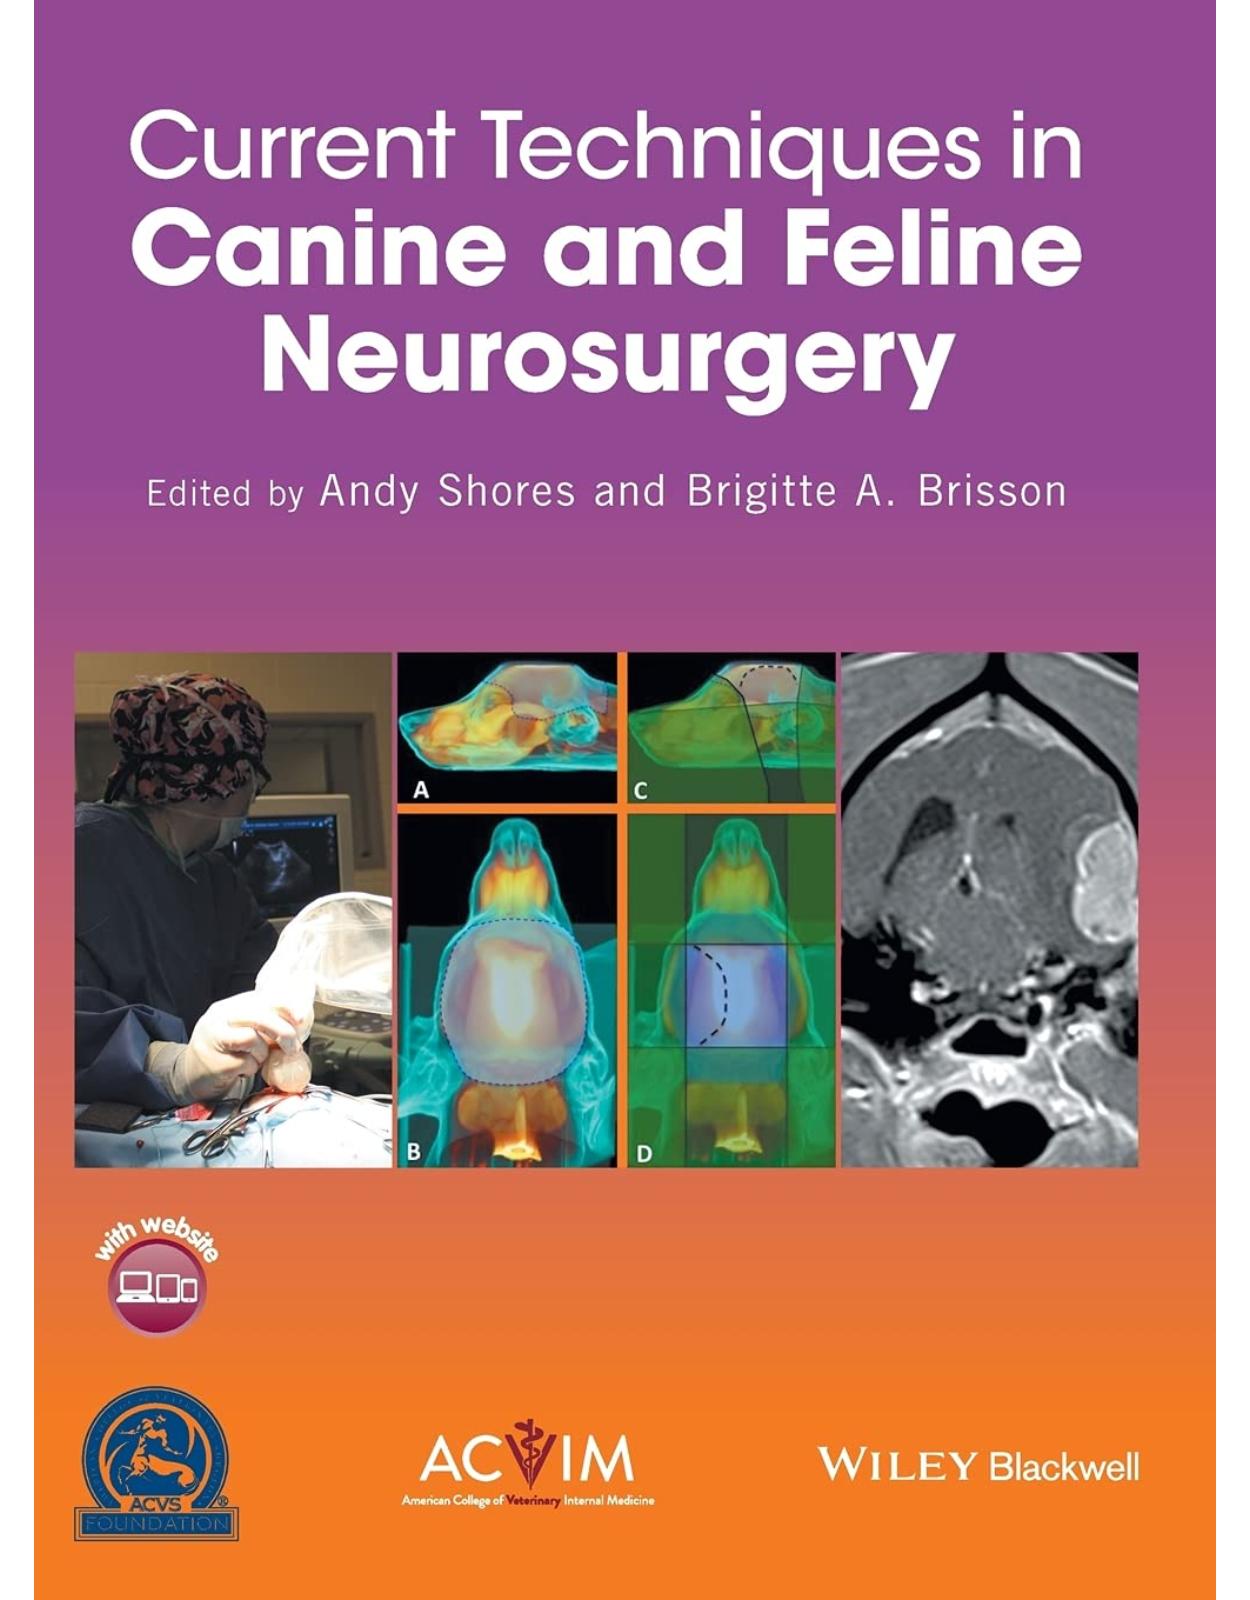 Current Techniques in Canine and Feline Neurosurgery